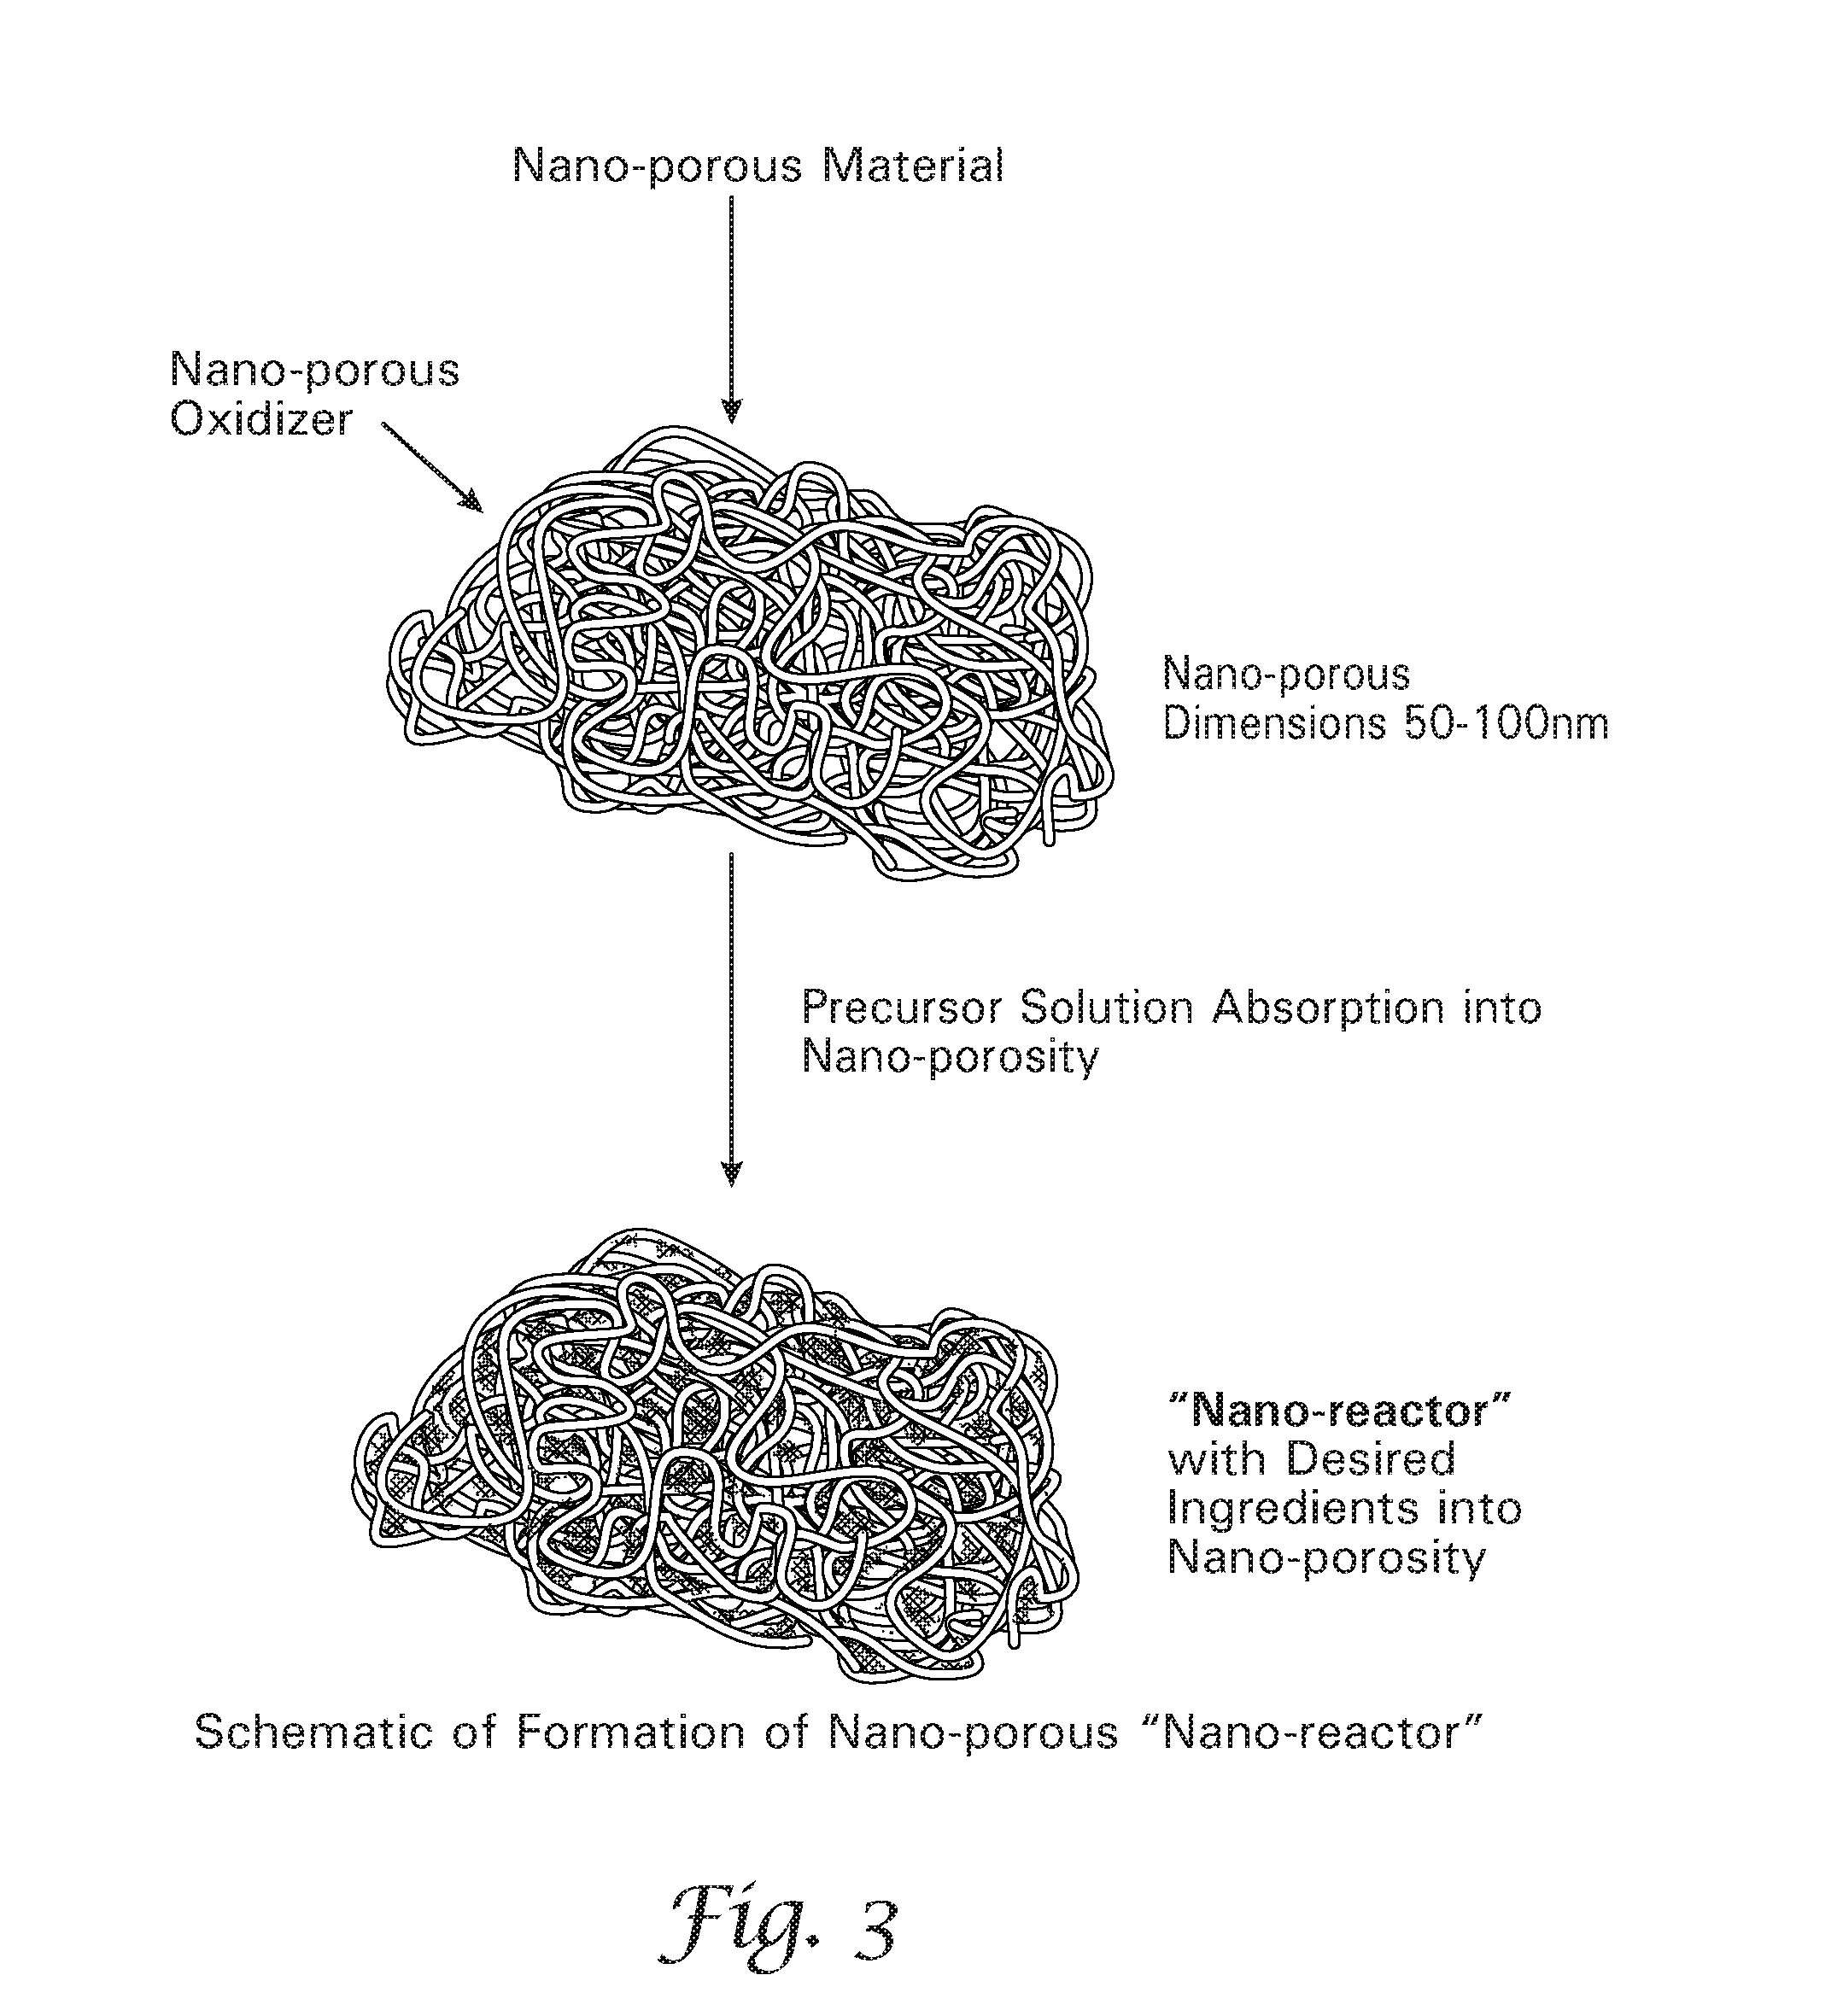 Propellants and high energy materials compositions containing nano-scale oxidizer and other components